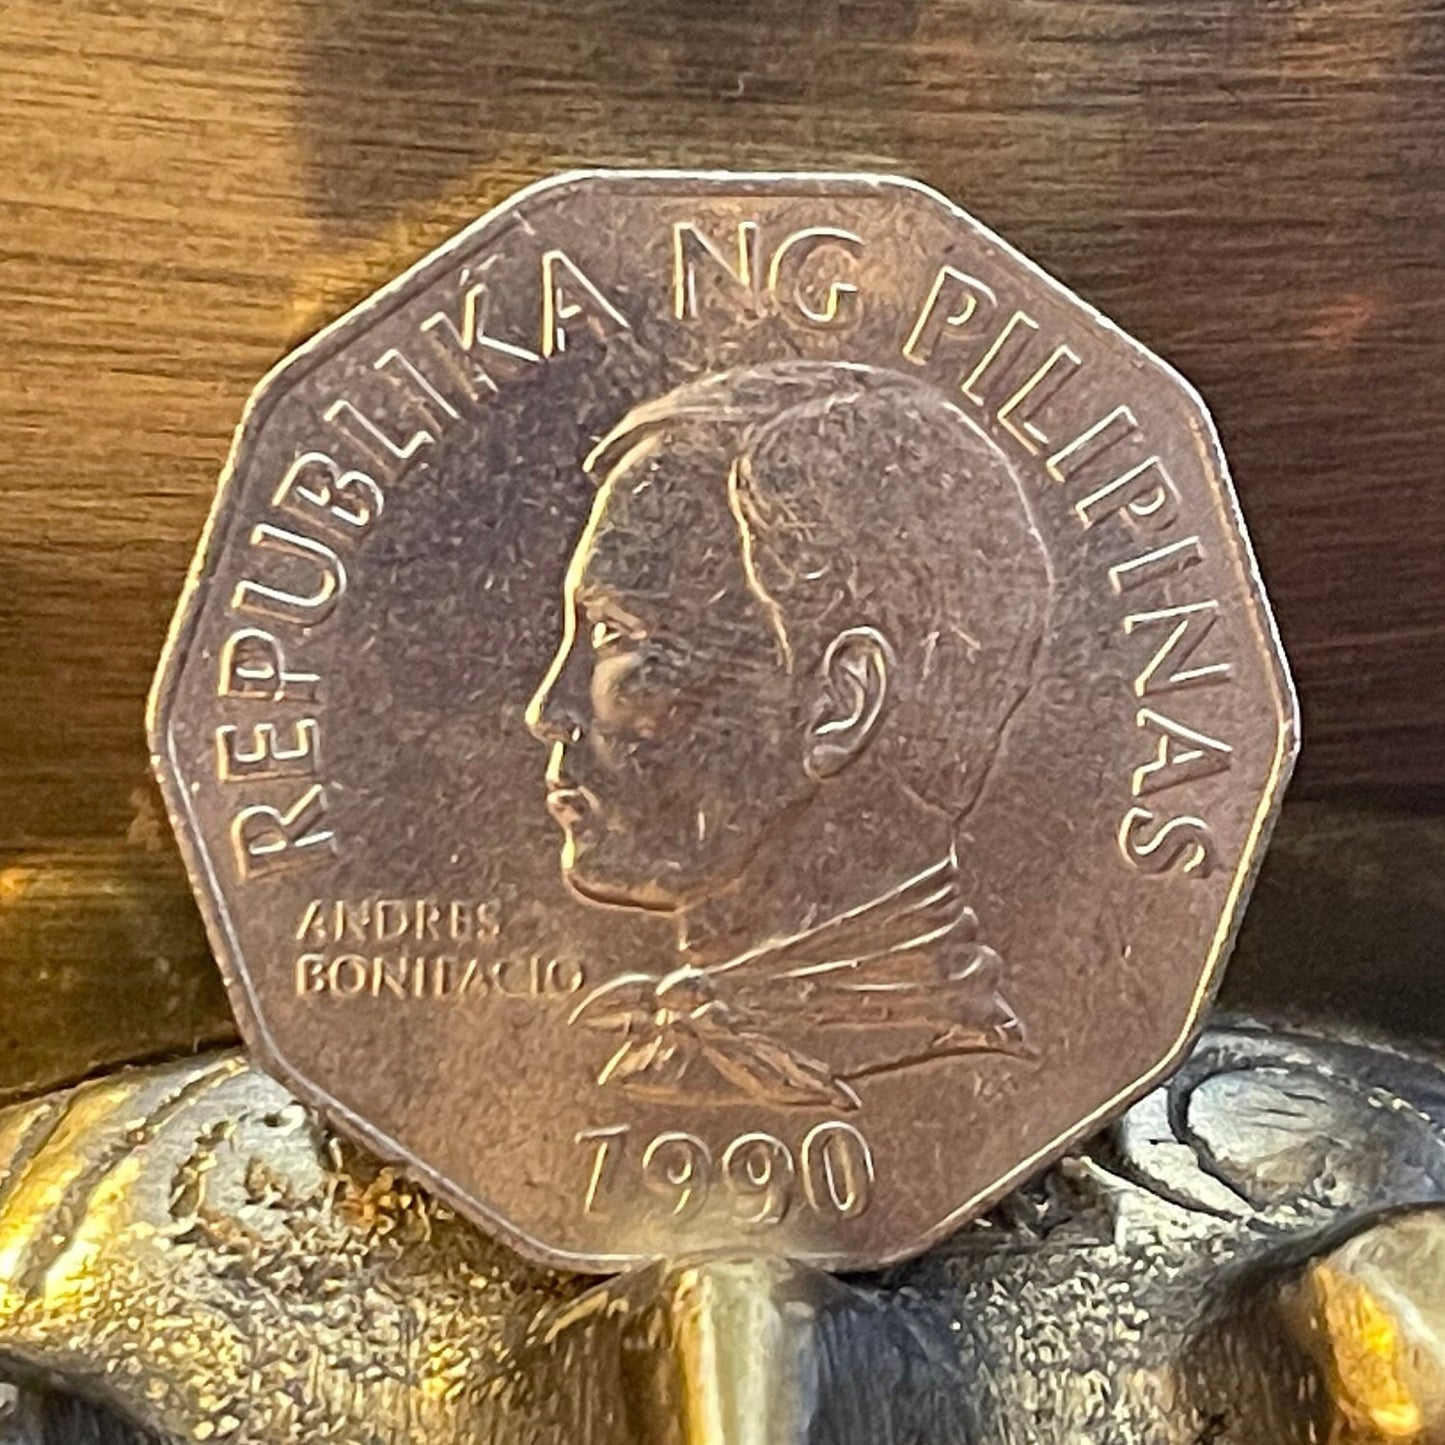 President Andrés Bonifacio & Coconut Palm 2 Piso Philippines Authentic Coin Money for Jewelry (Tree of Life) (Decagonal) (10-Sided) (Beach)